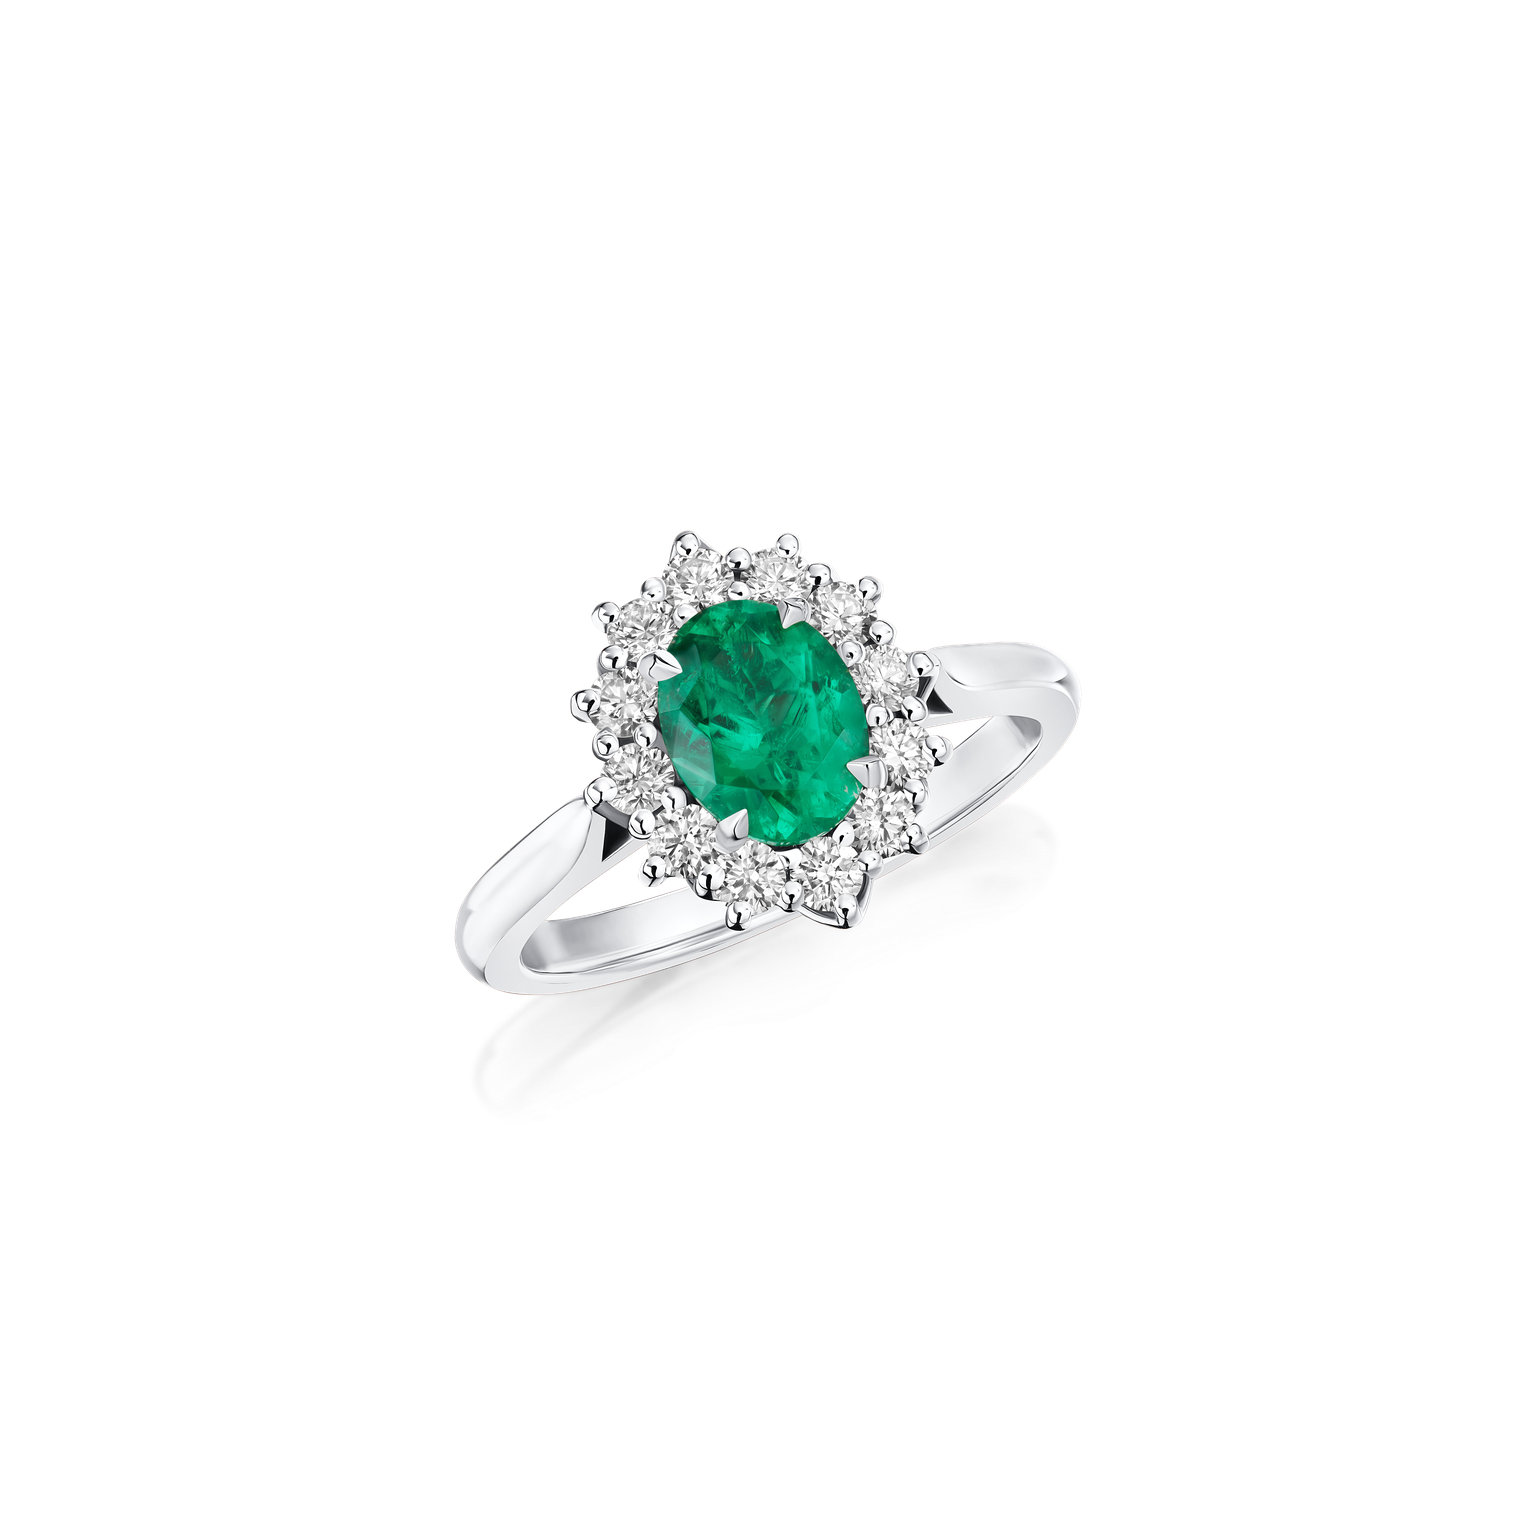 0.97ct Emerald and Diamond Cluster Ring